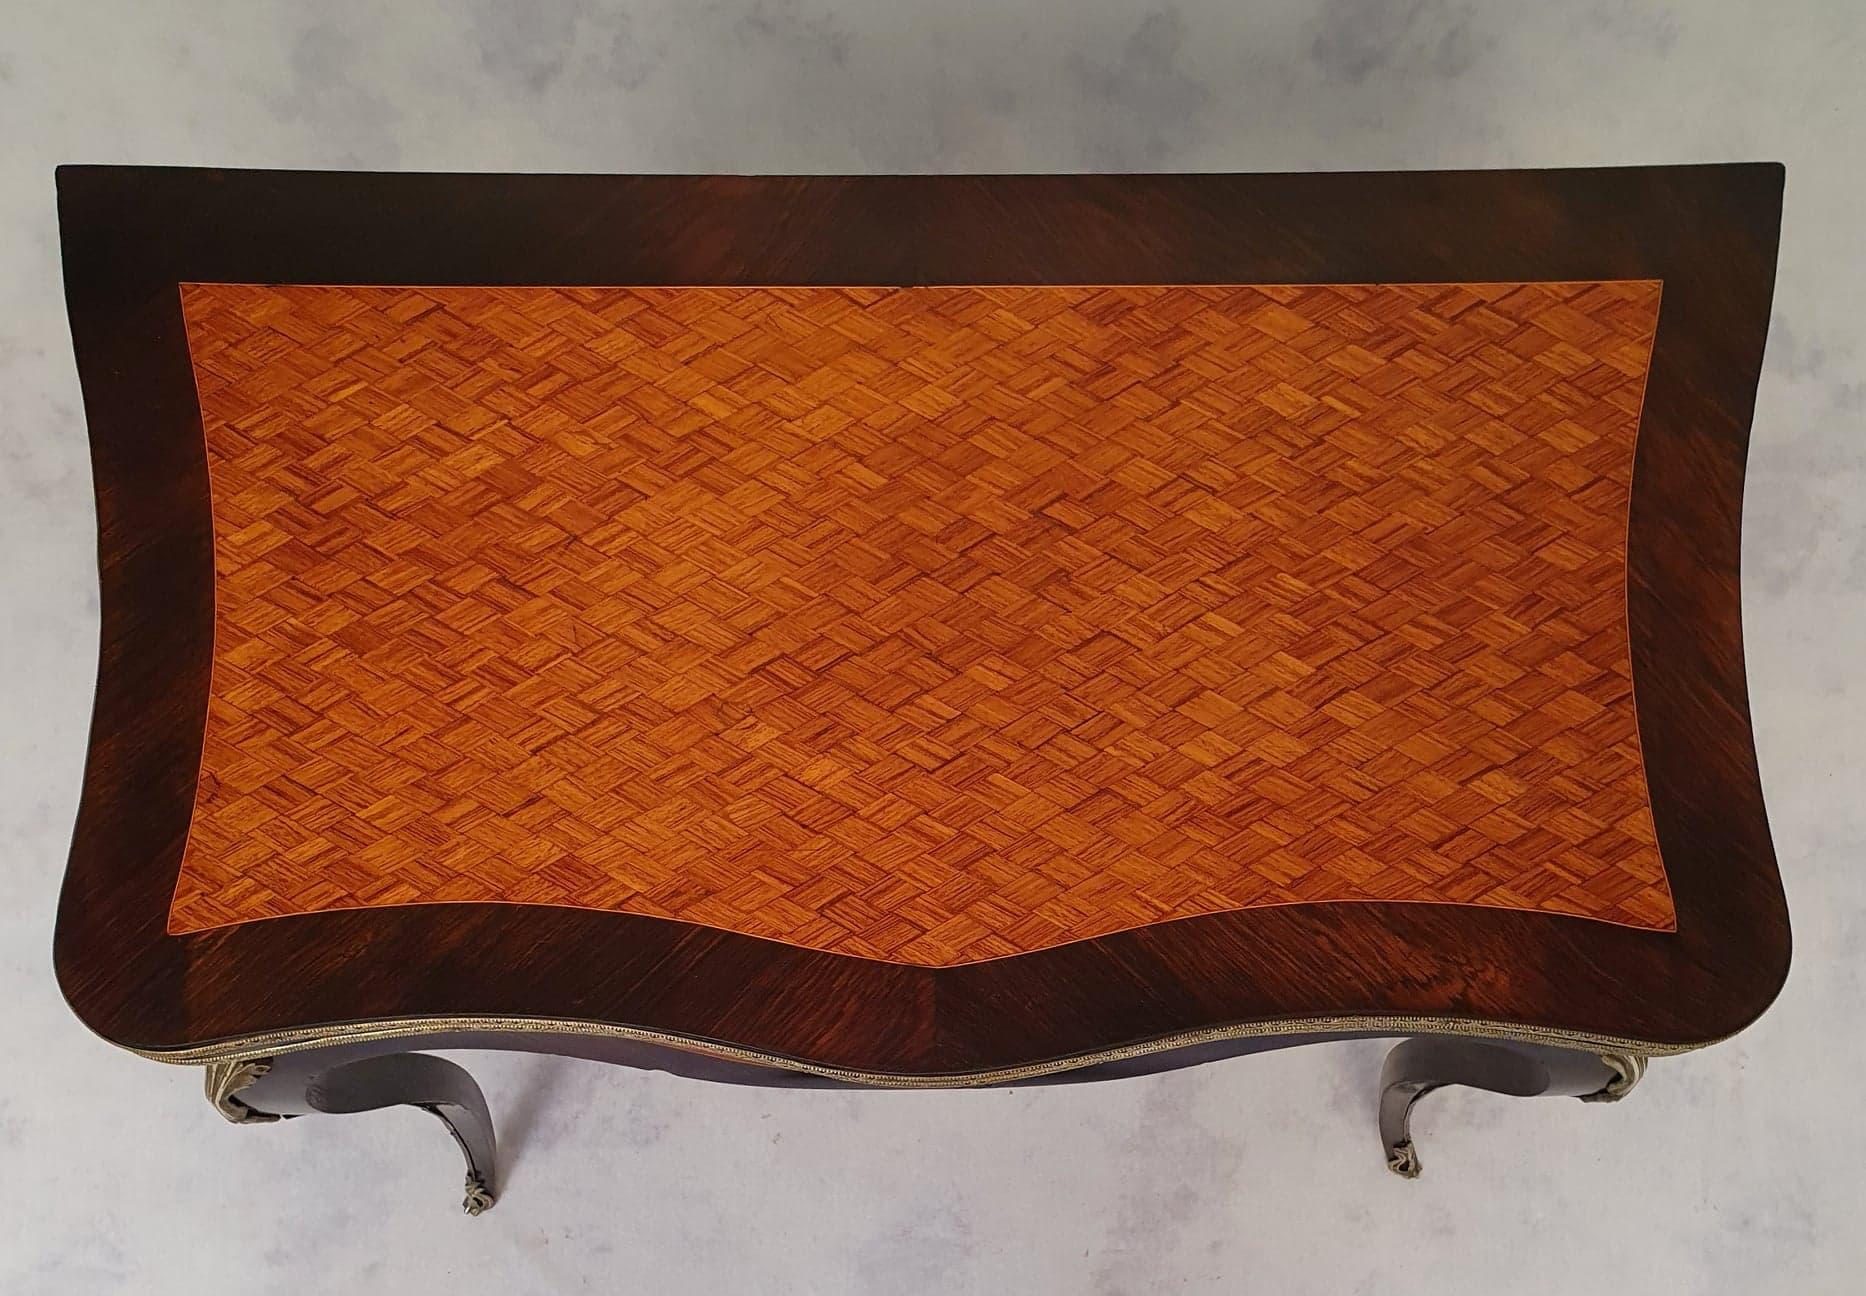 Louis XV style eventful game table, Napoleon III period. This table is worked in rosewood and rosewood. Two exotic woods often used together to create contrast. Indeed, here rosewood is used to frame and highlight the work of curling, marquetry,